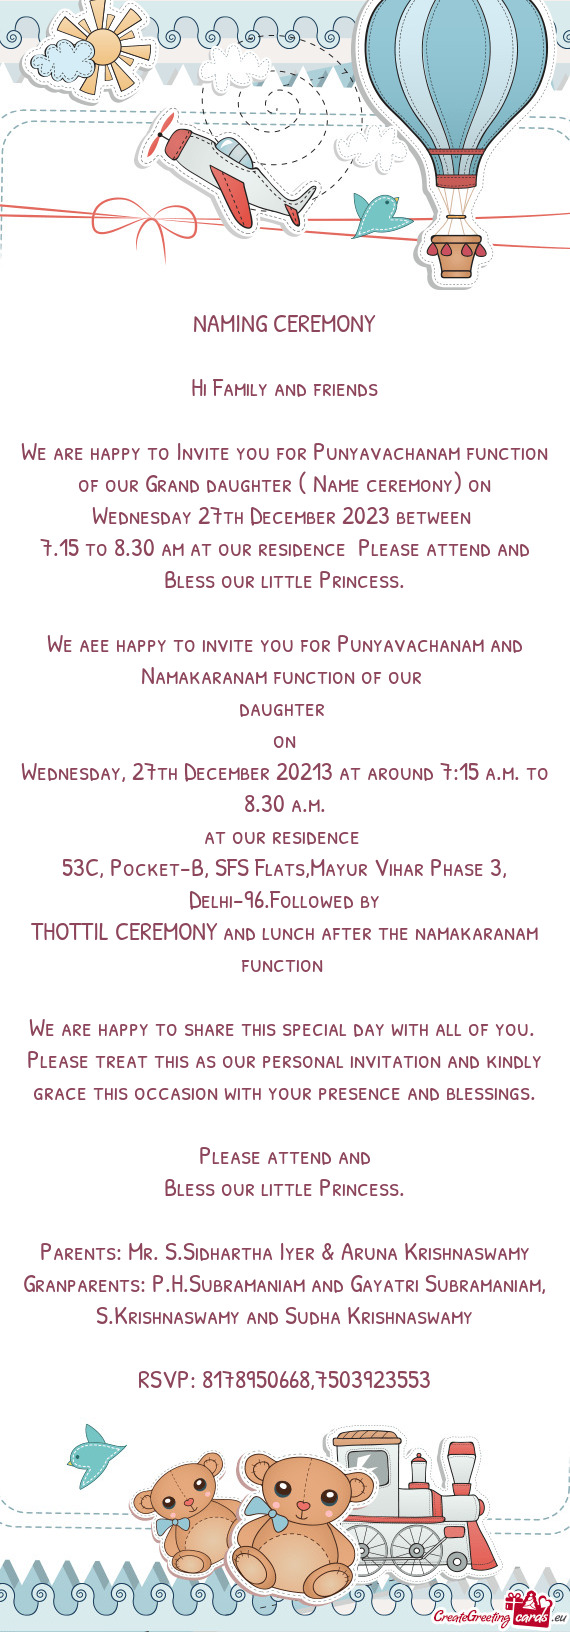 We are happy to Invite you for Punyavachanam function of our Grand daughter ( Name ceremony) on